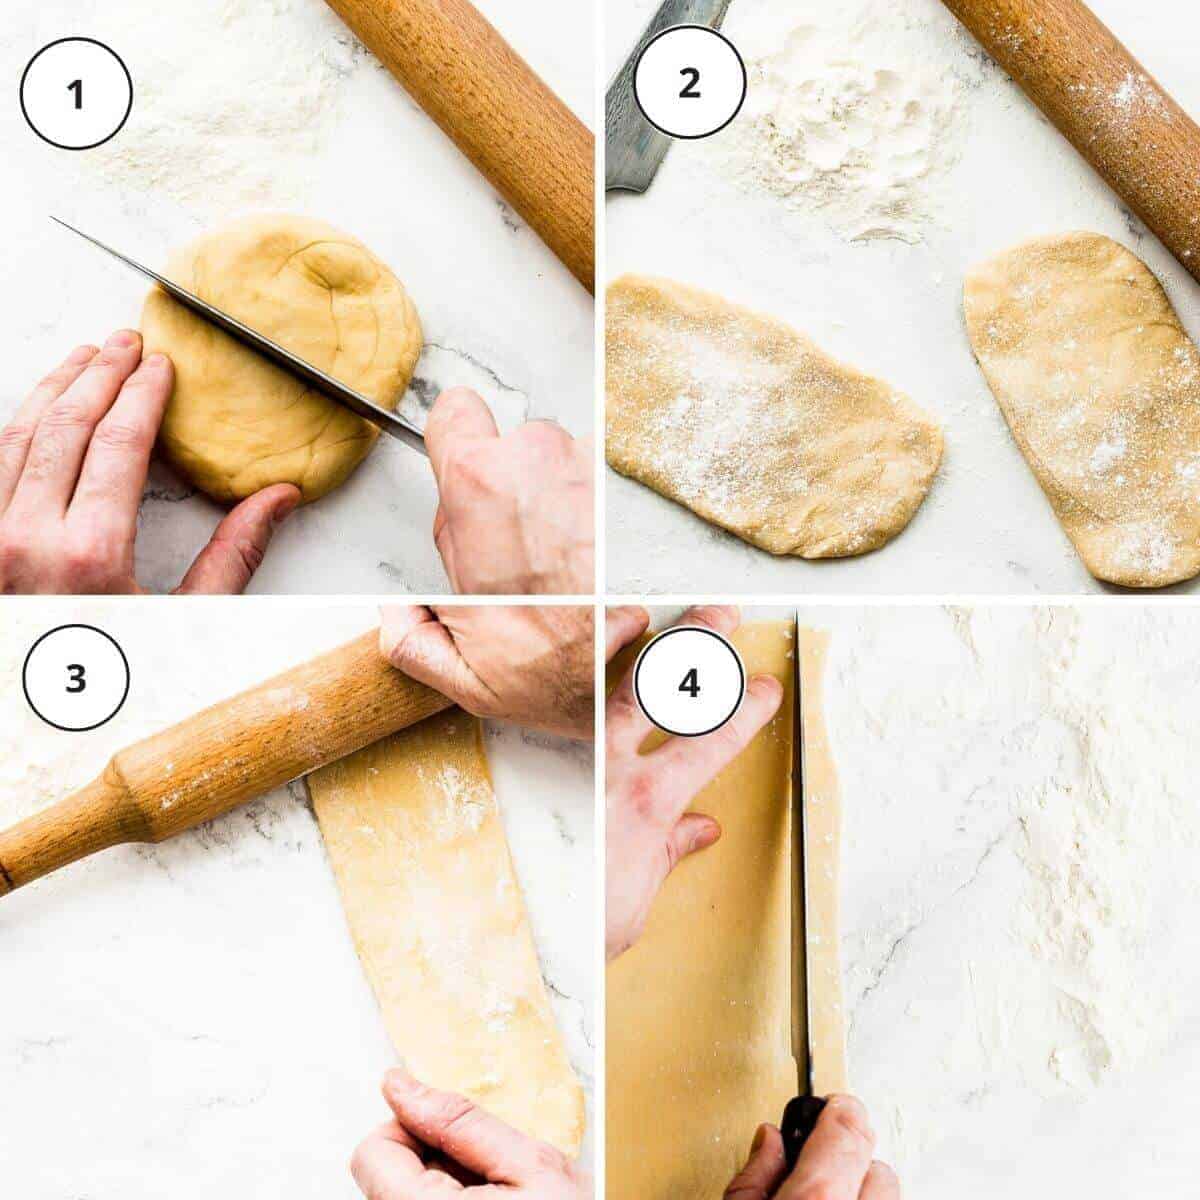 picture steps how to roll and cut fresh pasta dough by hand.